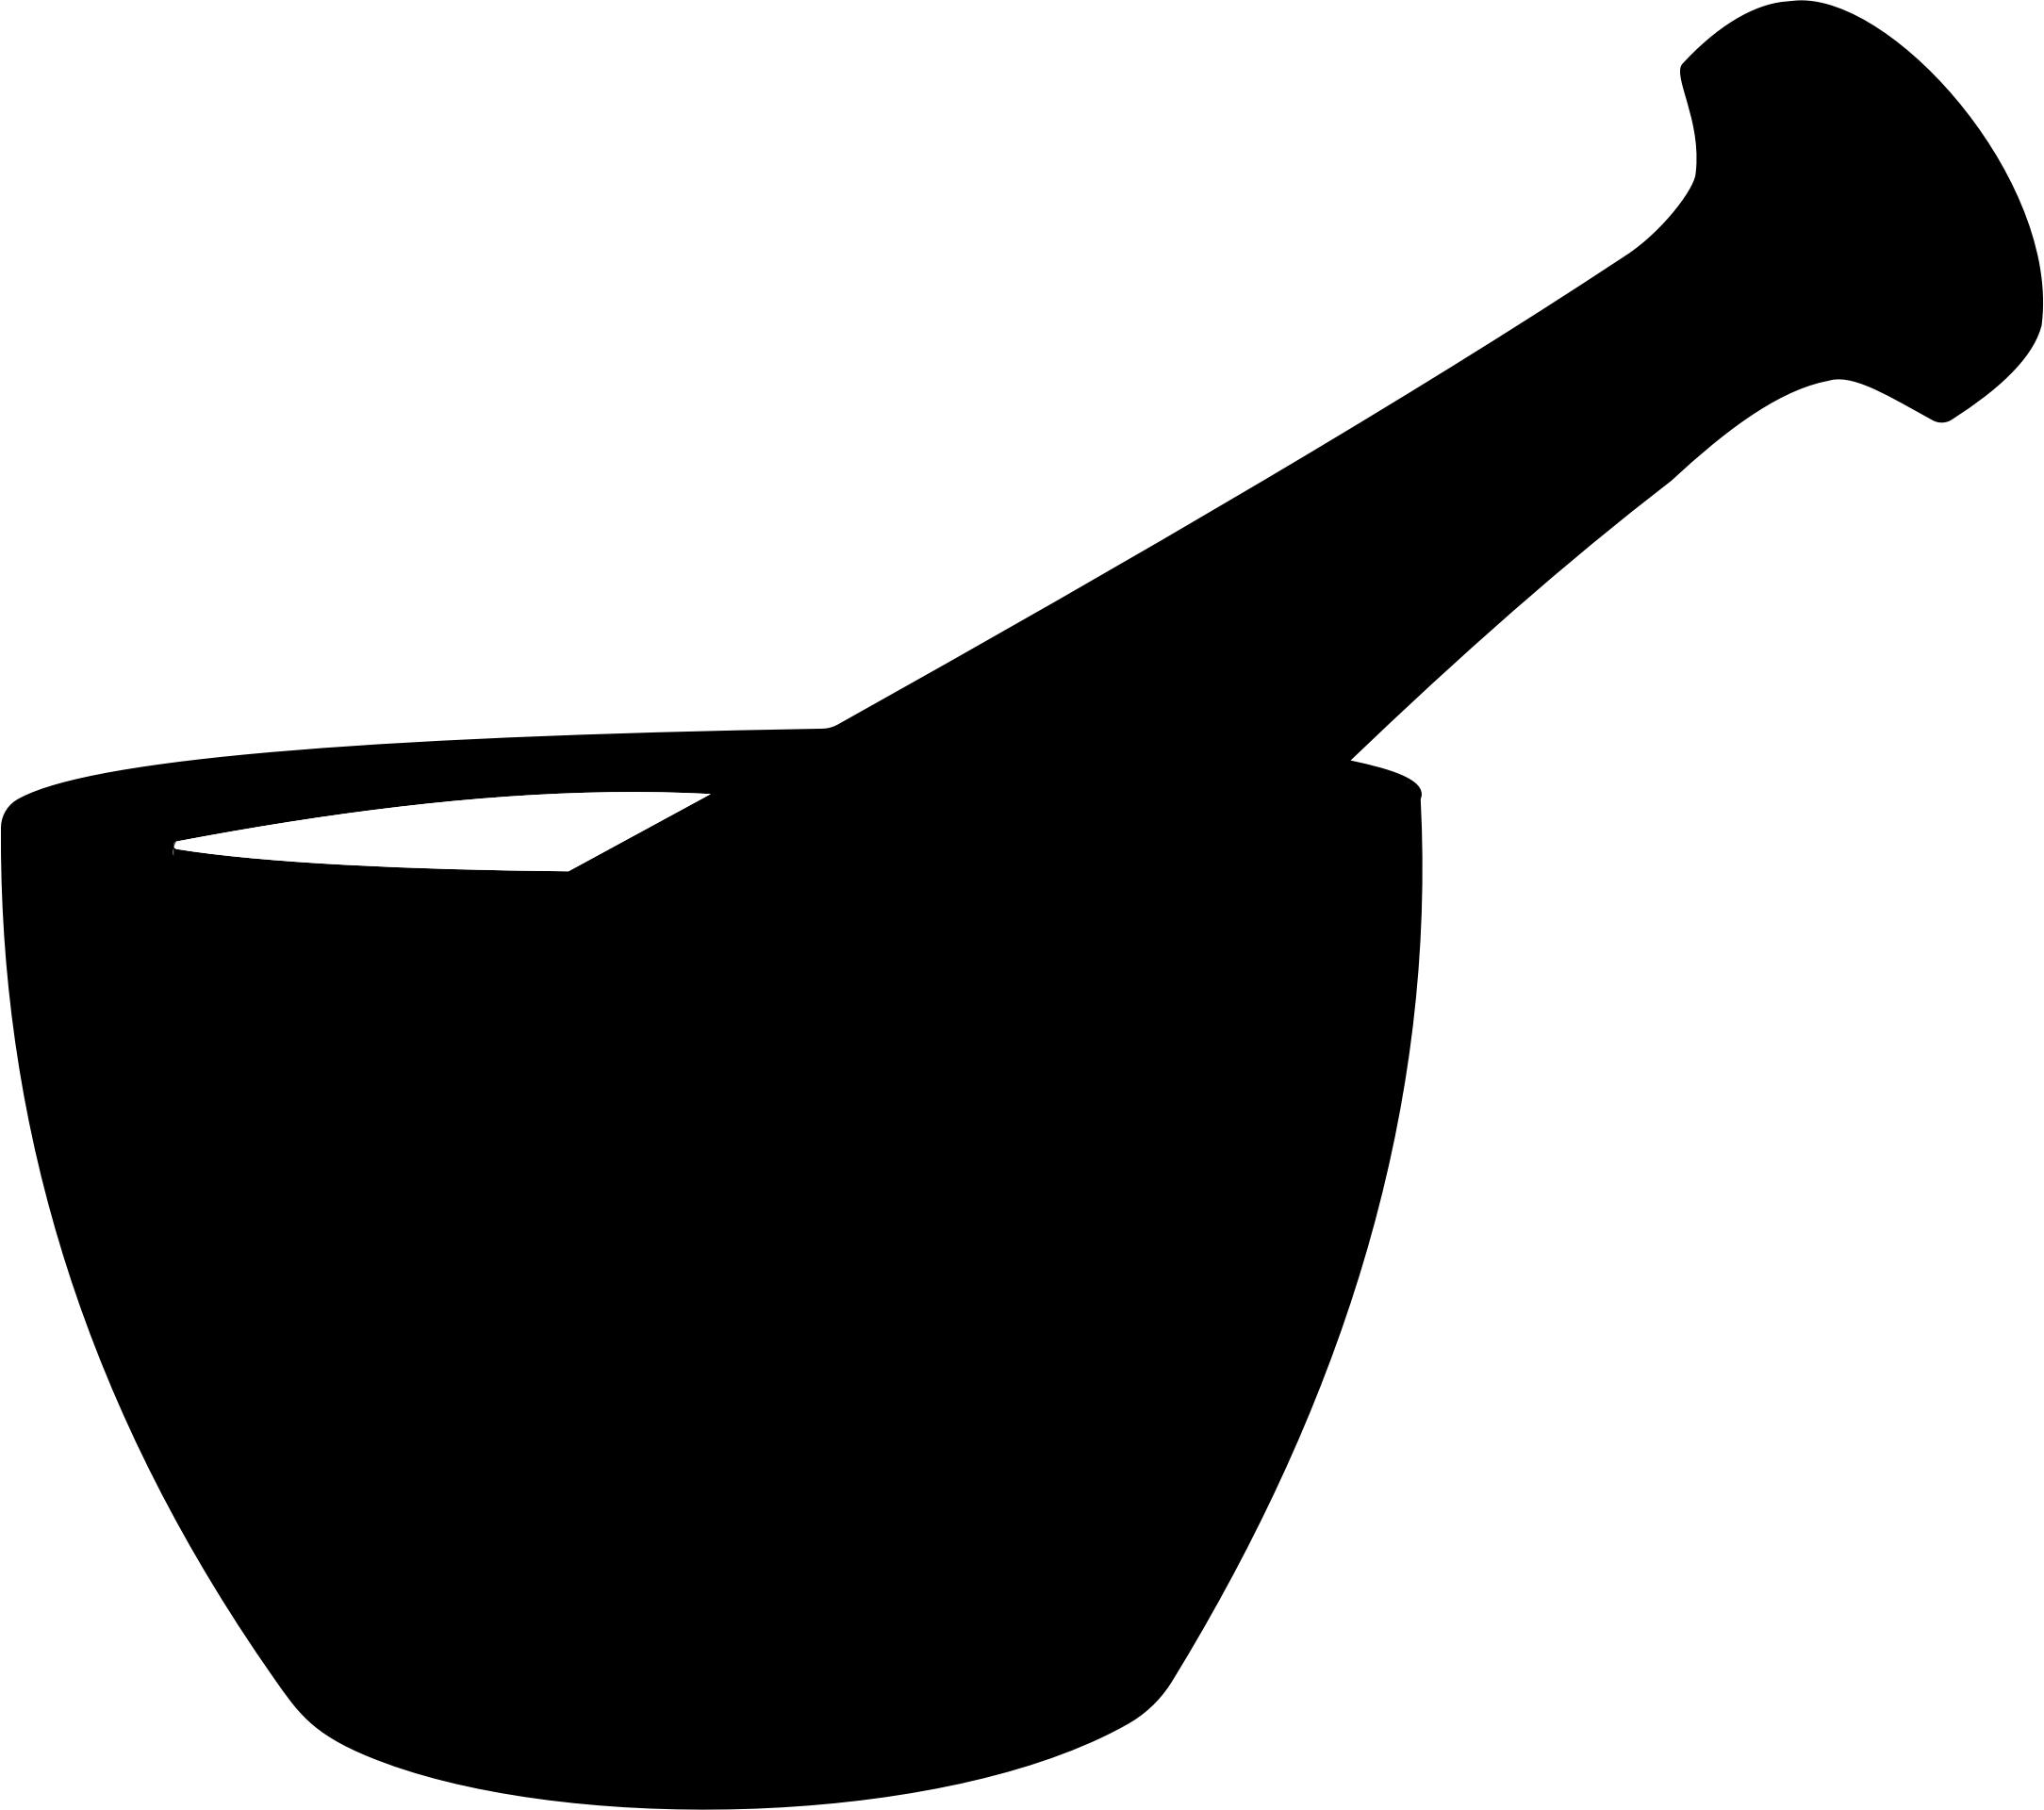 Mortar And Pestle Silhouette 2 png